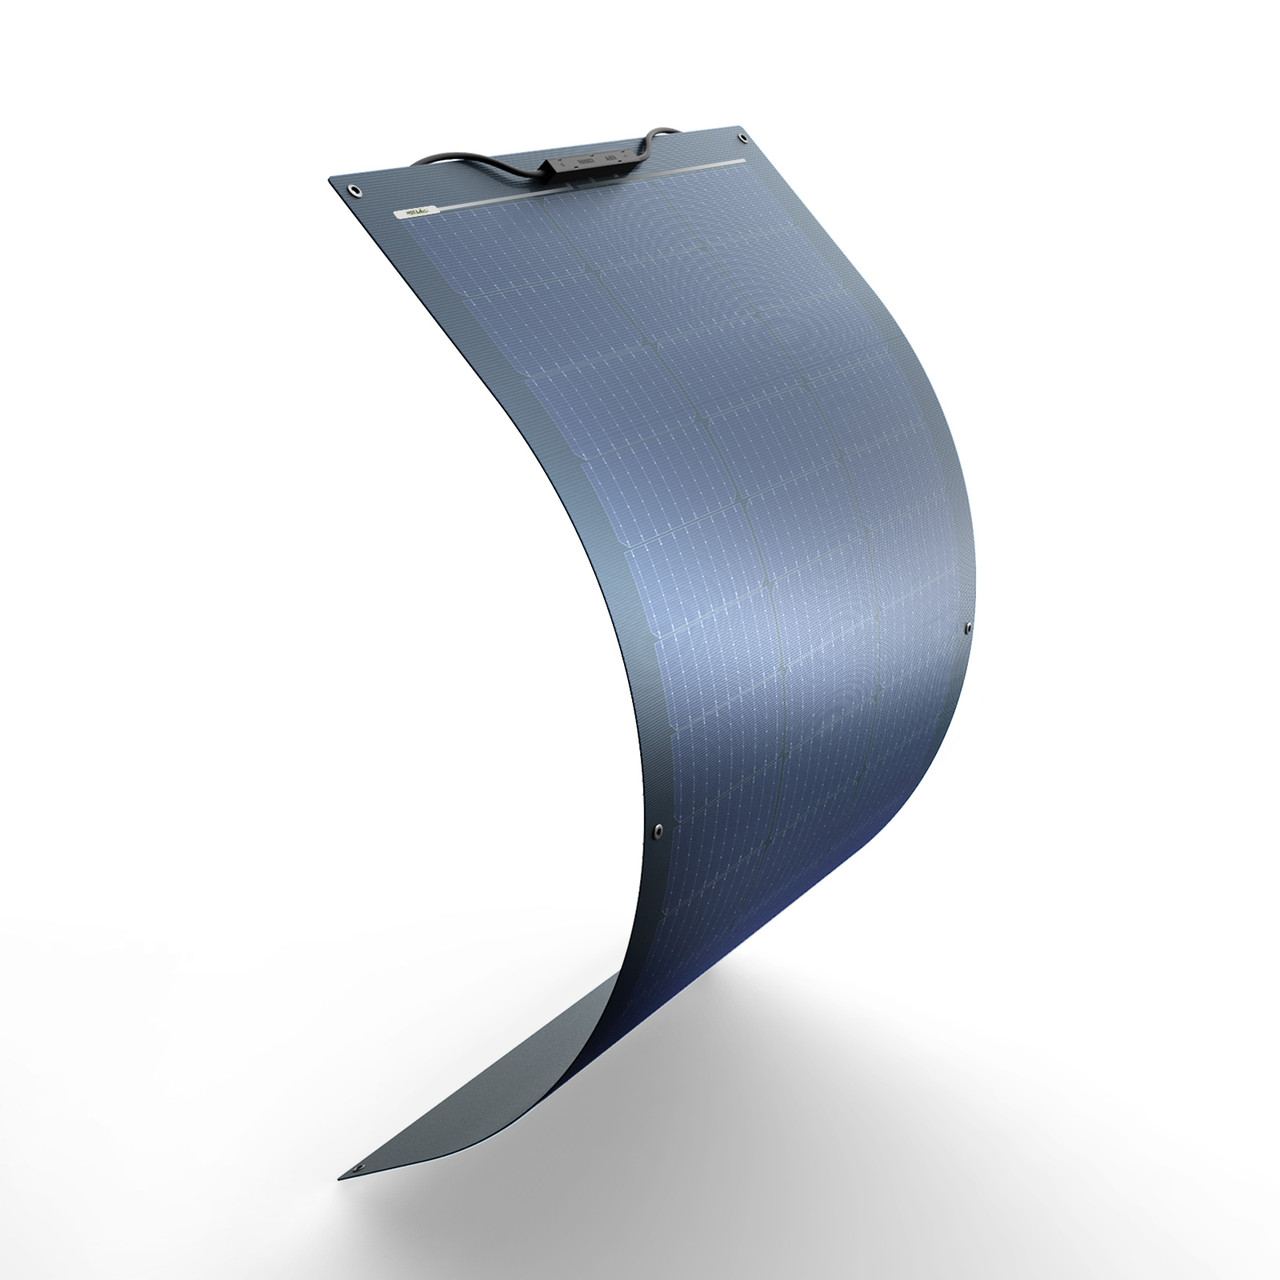 What Are Flexible Solar Panels?